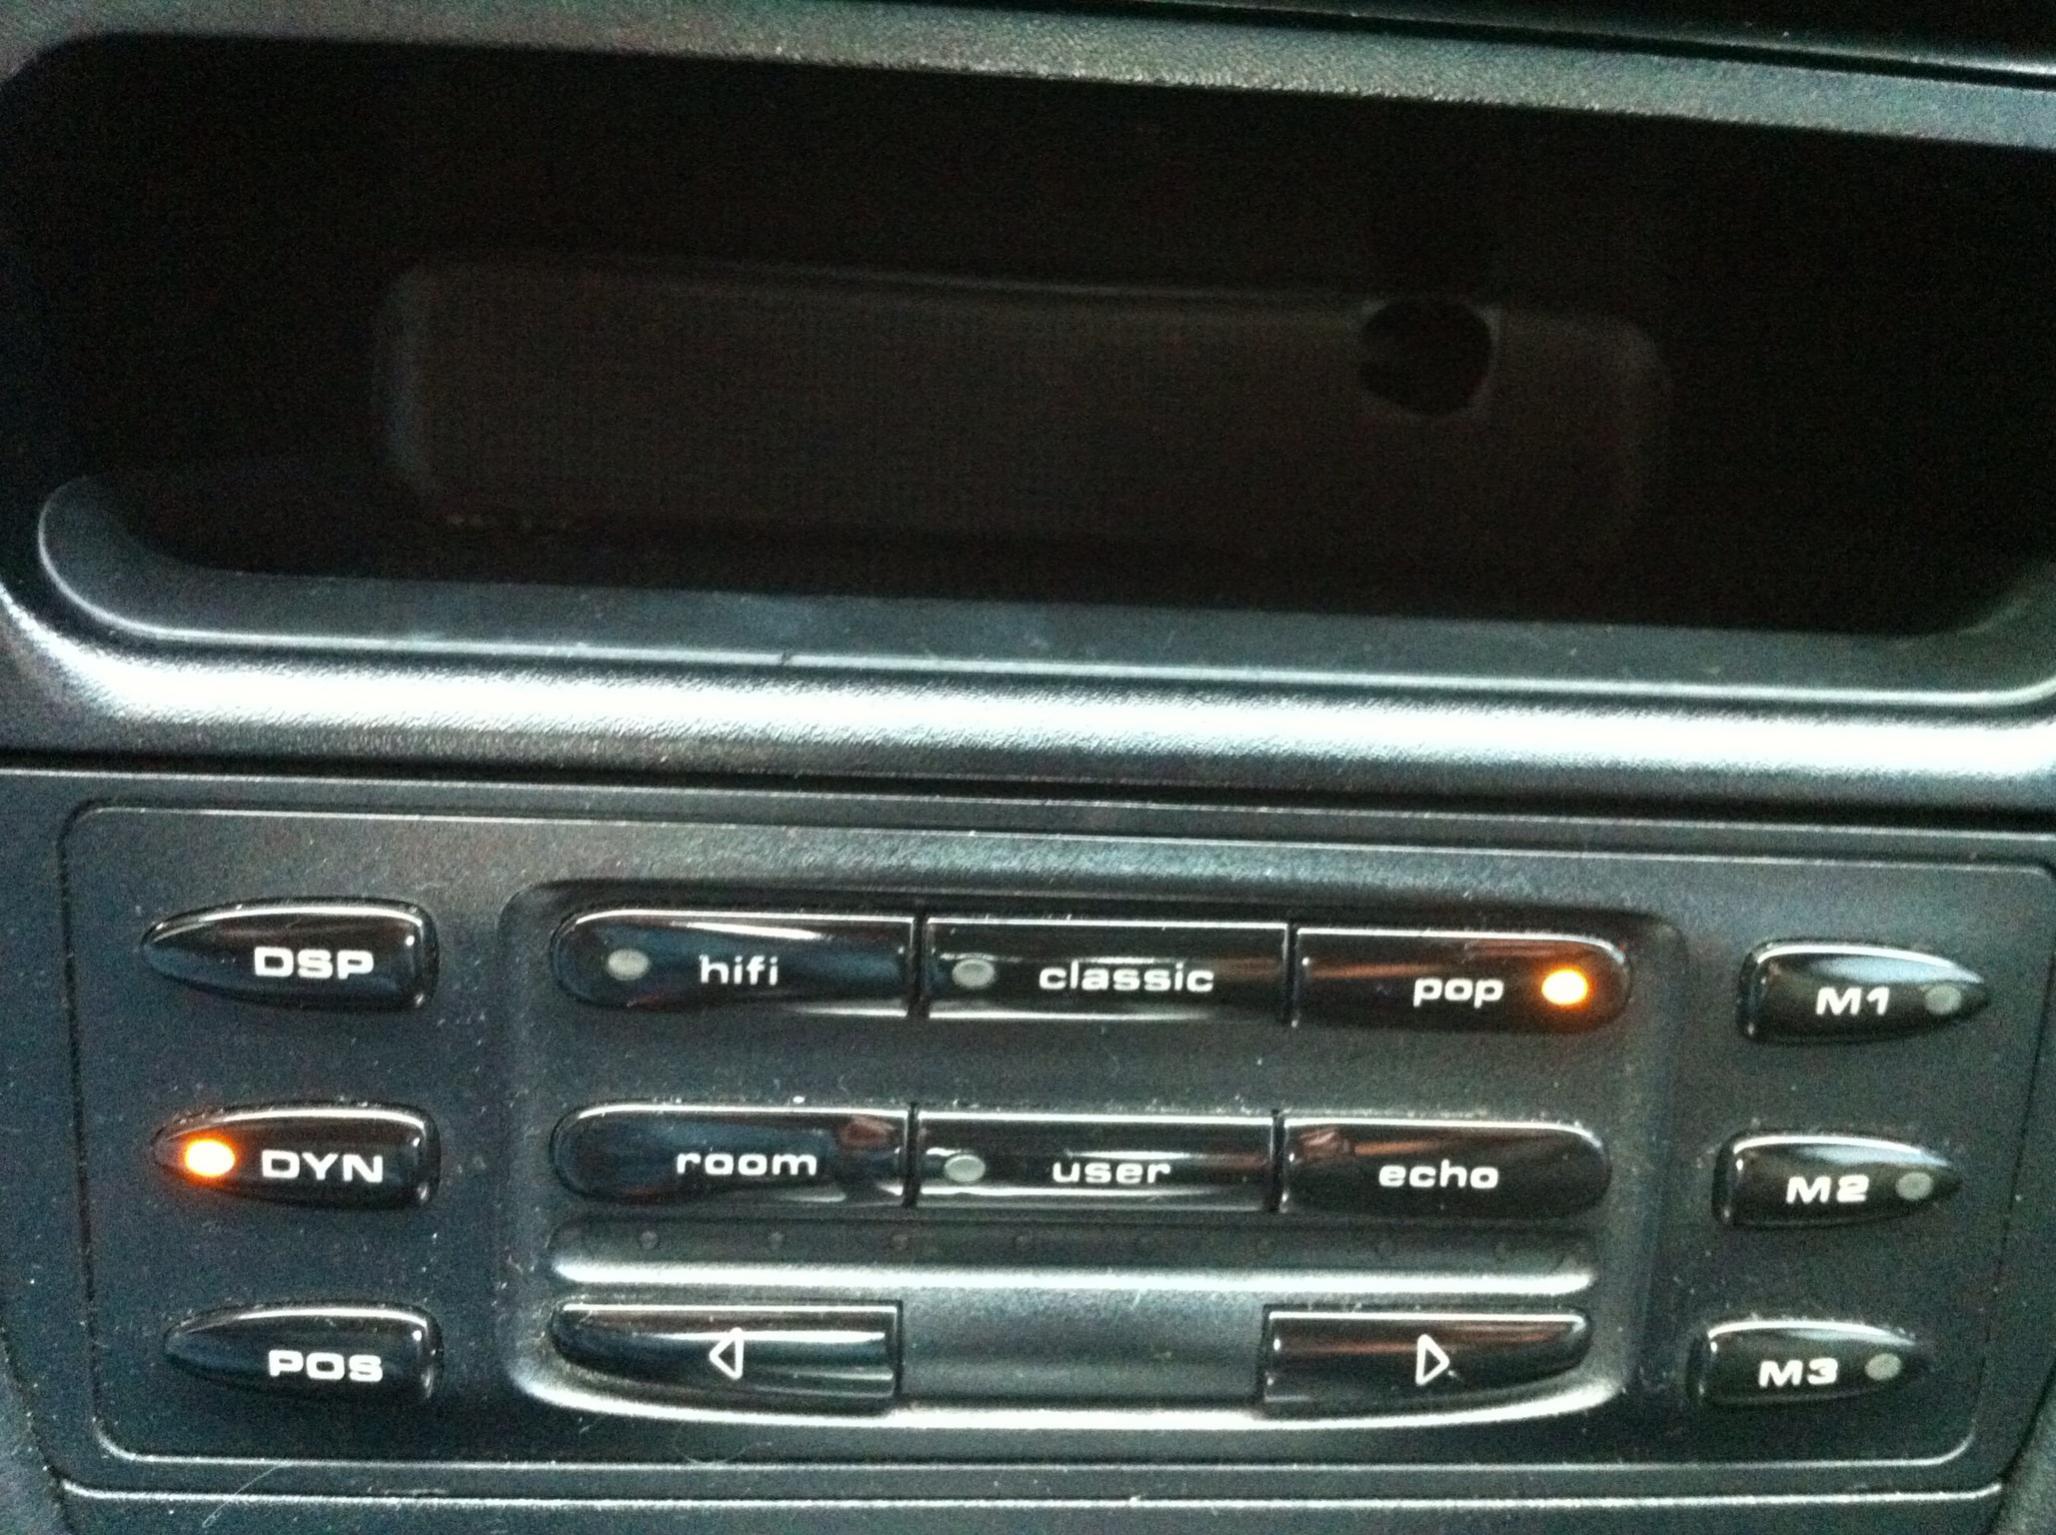 Becker CDR22 with CD Changer, original manual and code